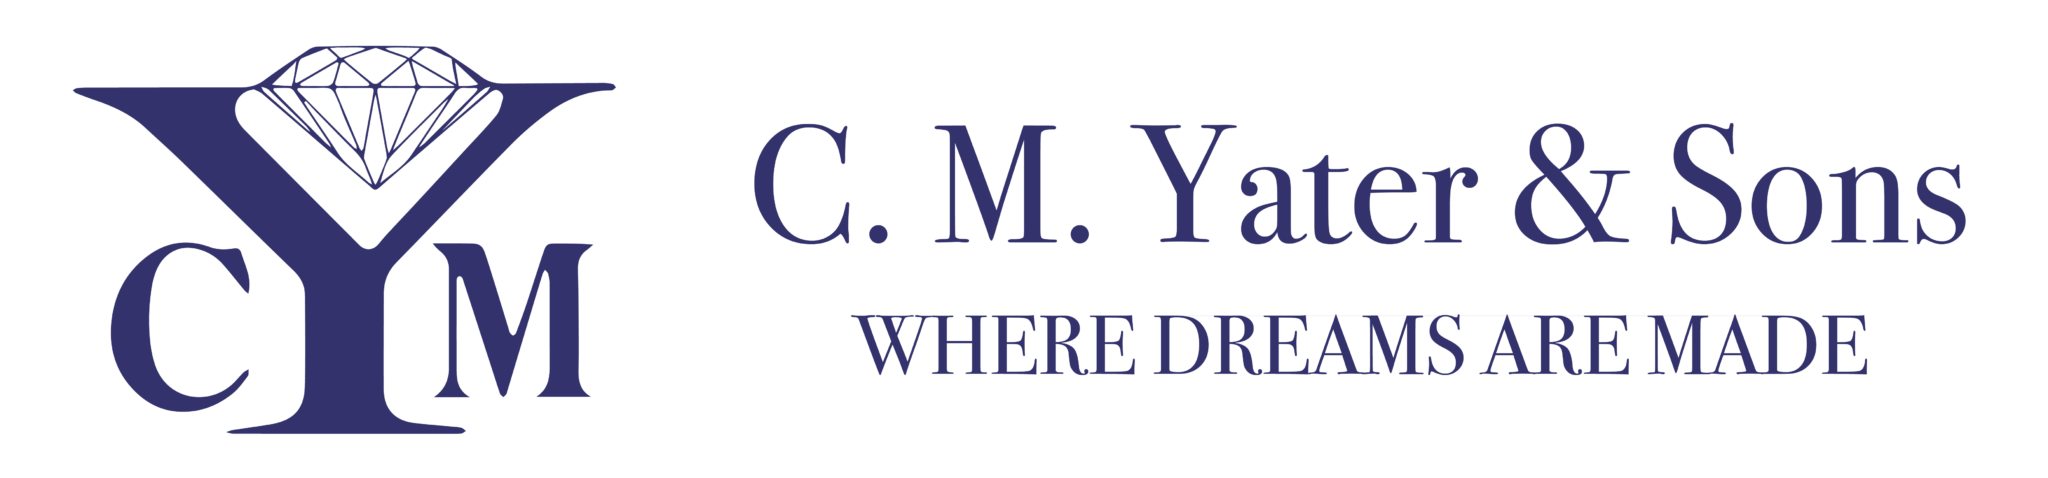 C.M. Yater & Sons